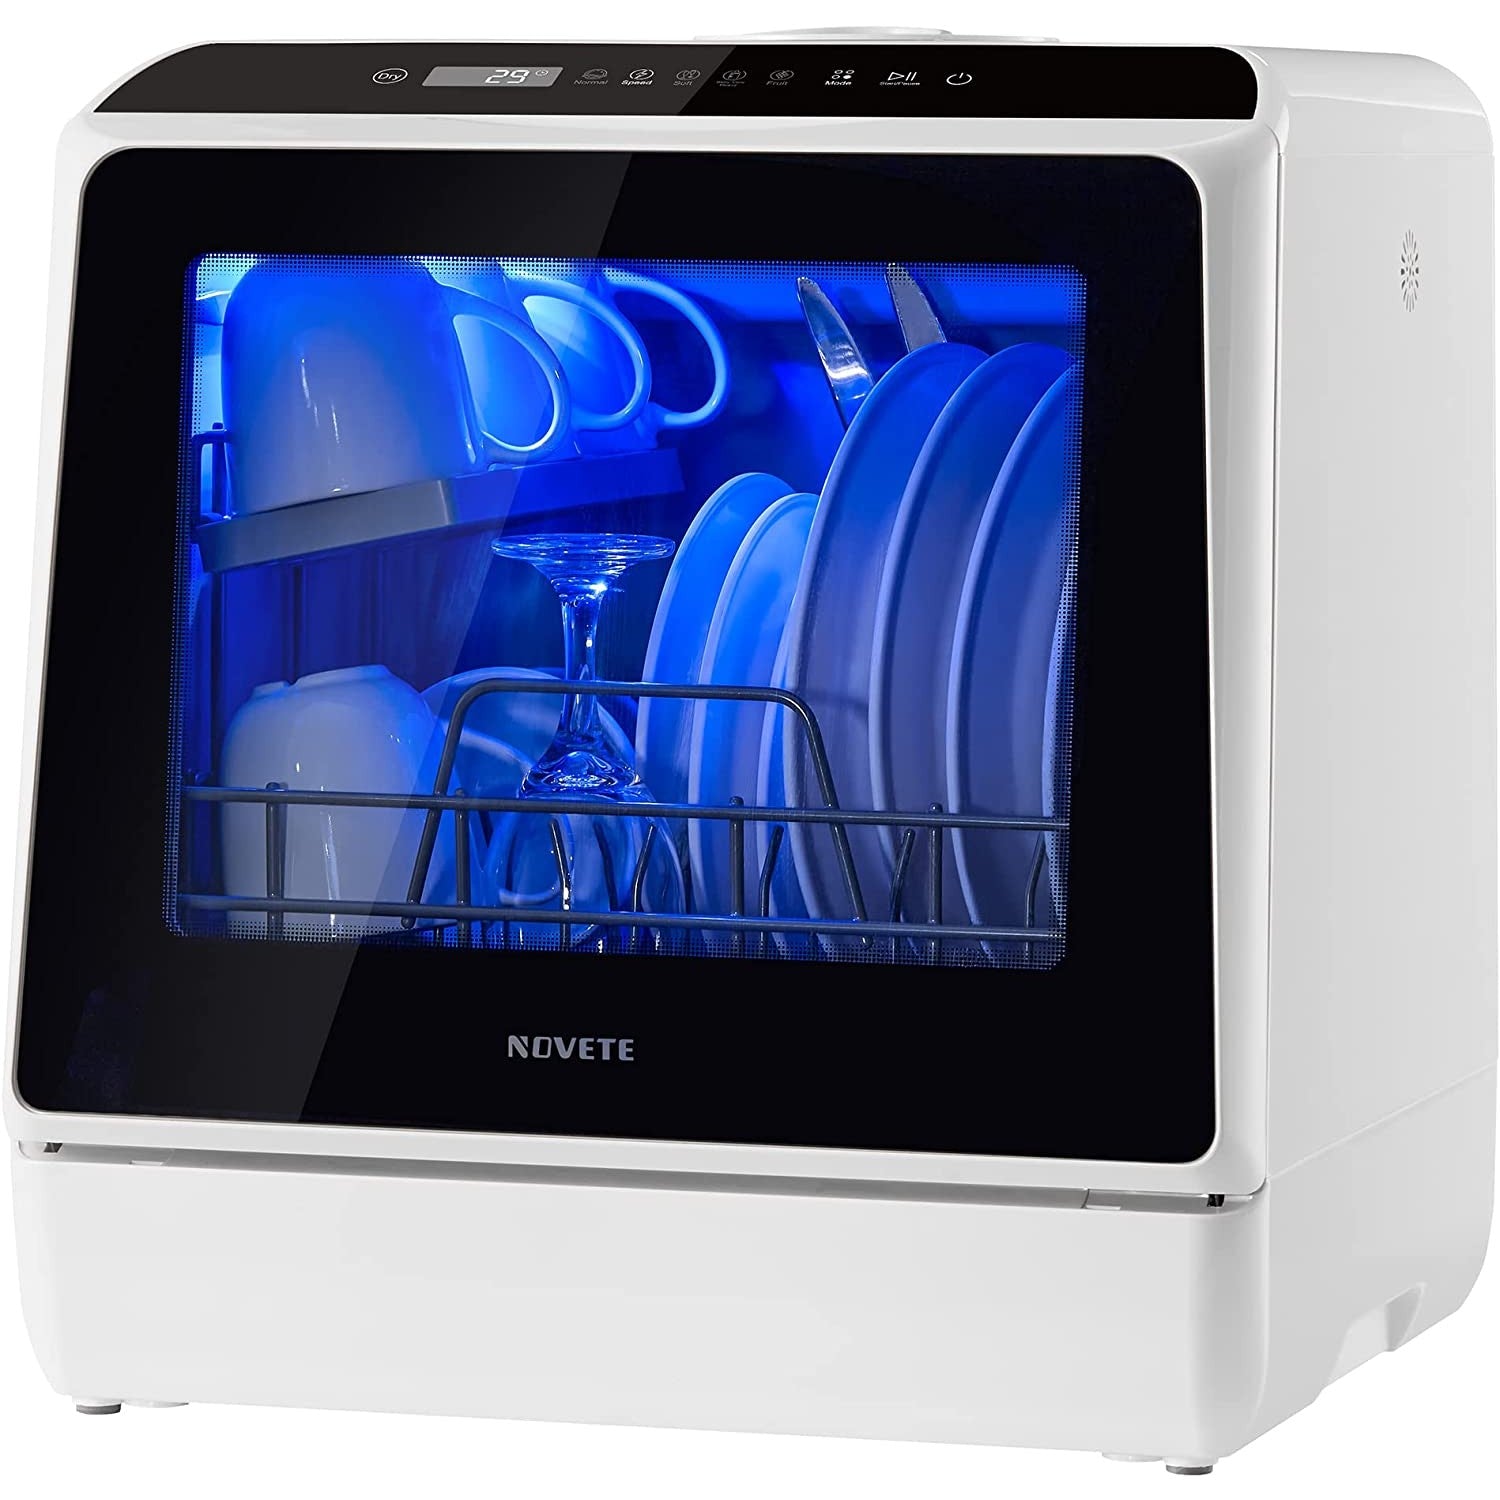 A compact portable dishwasher full of clean dishes with a blue light inside.